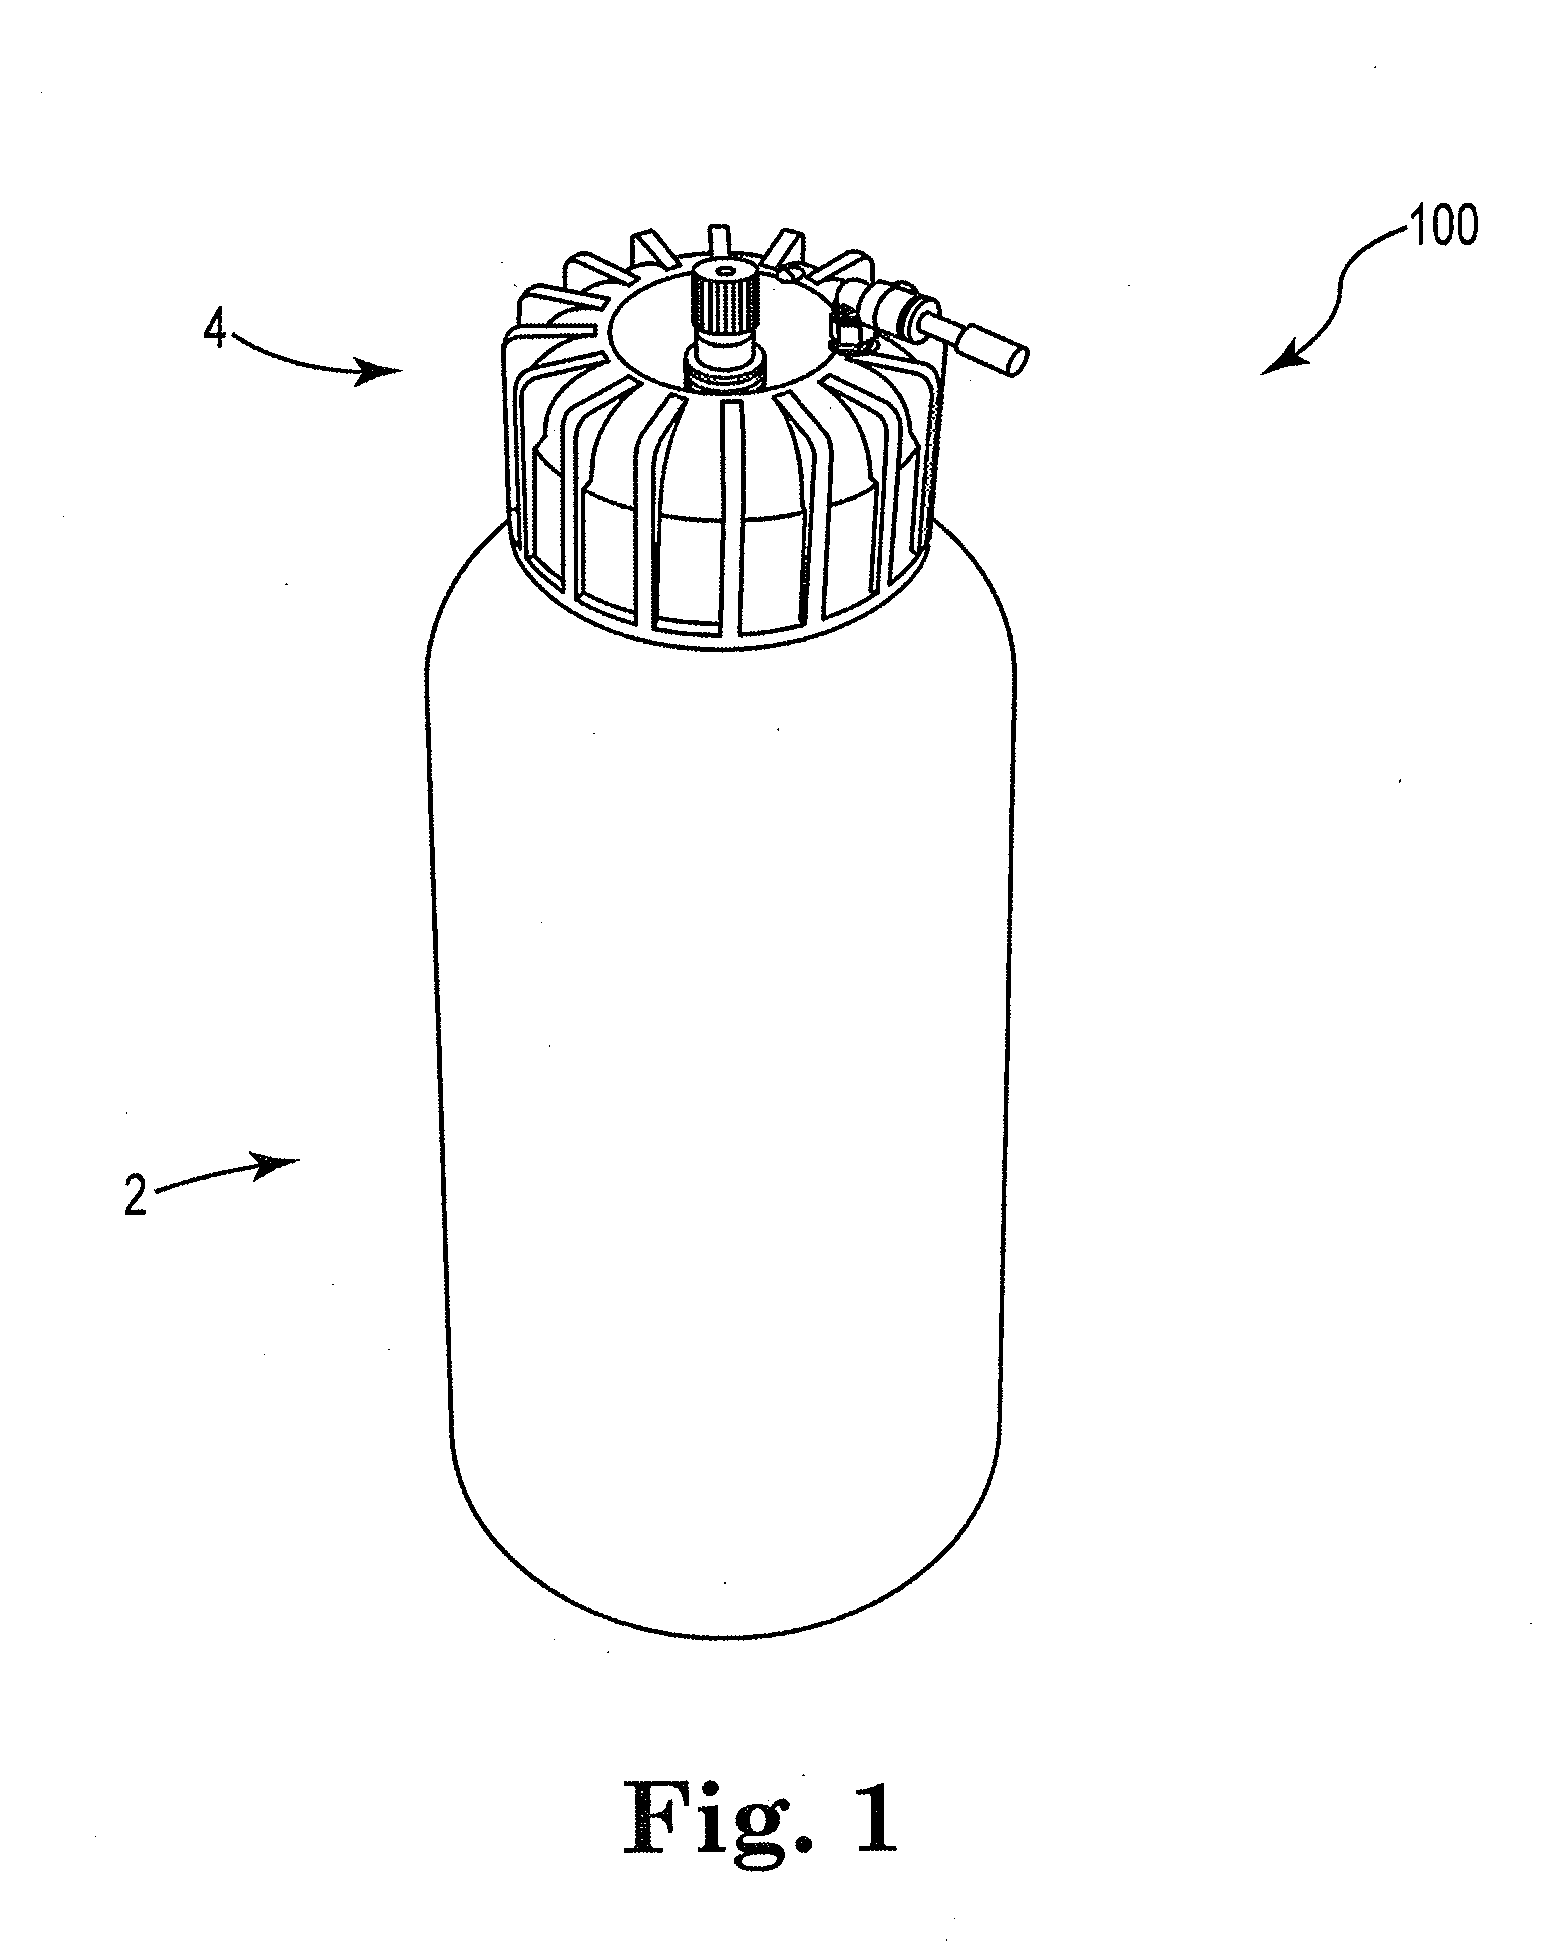 Closure/Connector for Liner-Based Dispense Containers